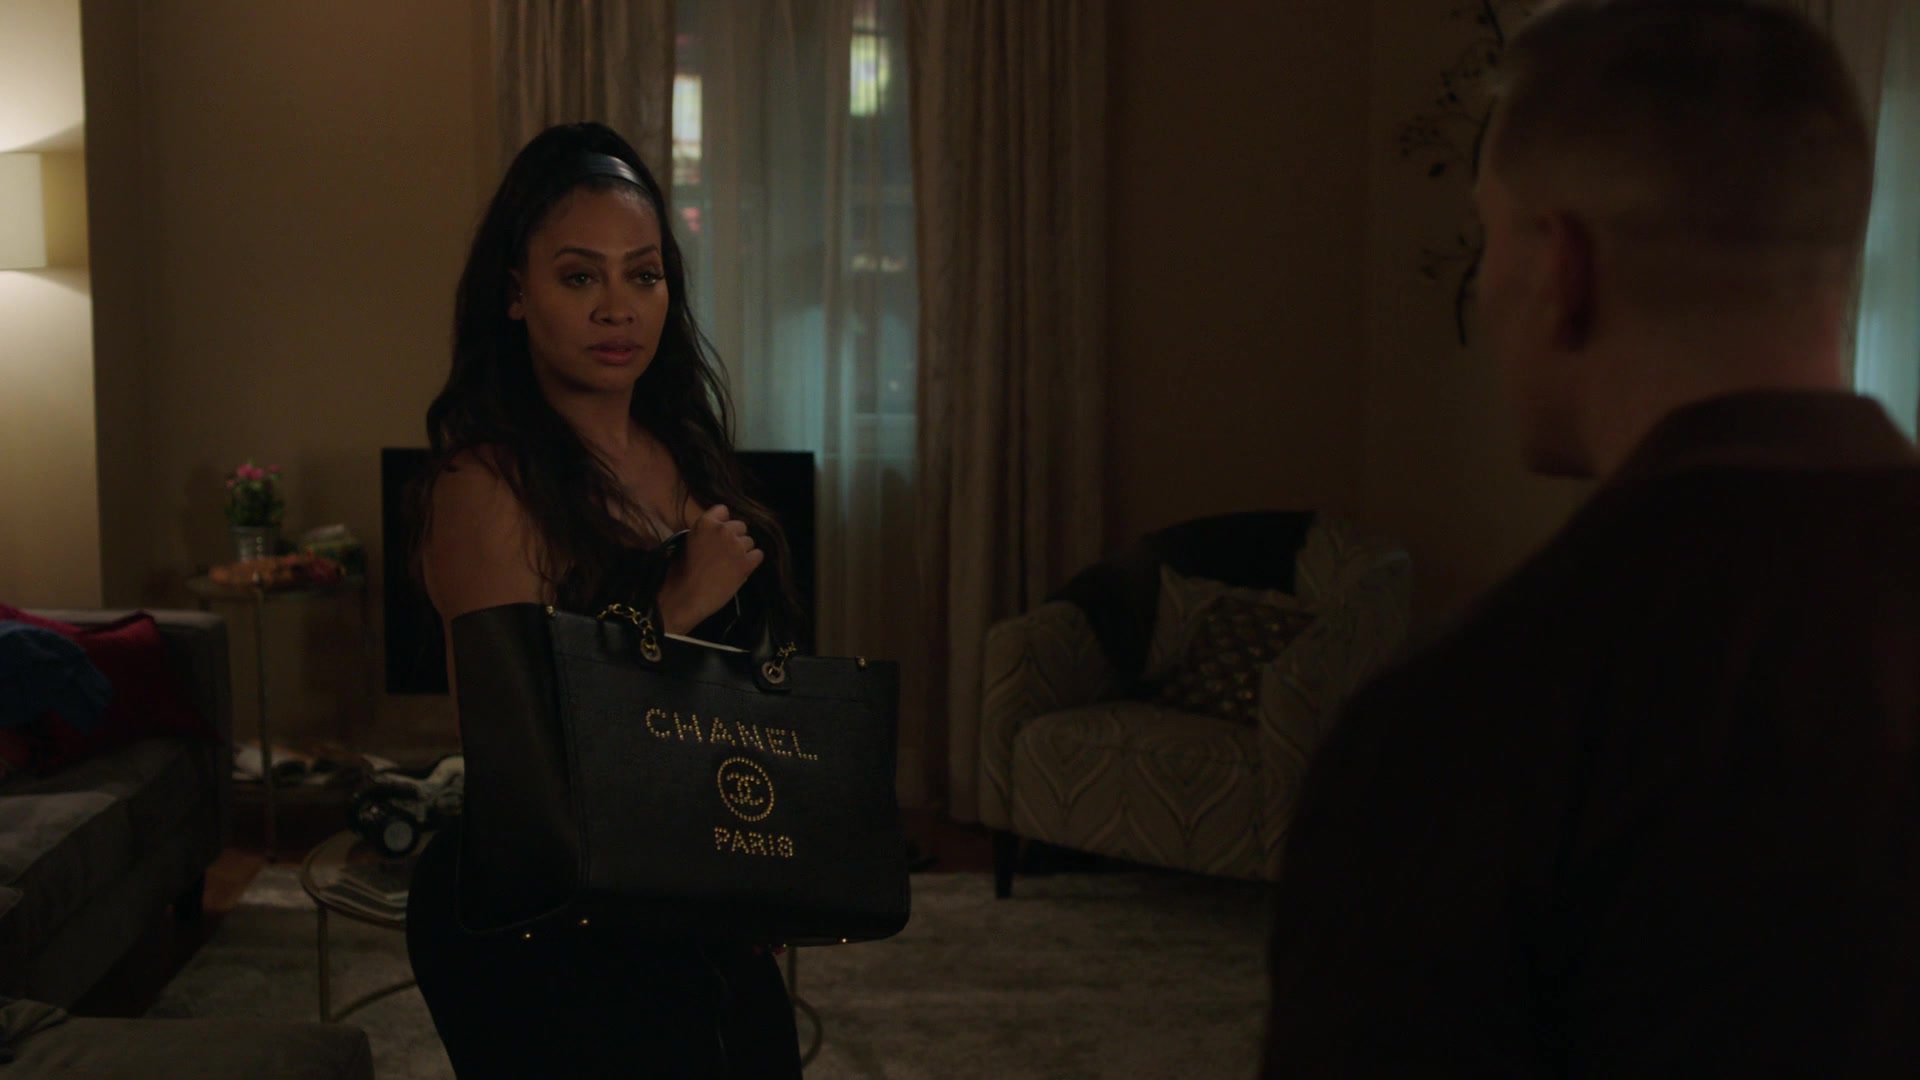 Chanel Handbag In Power - Season 6, Episode 2, Whose Side Are You On ...